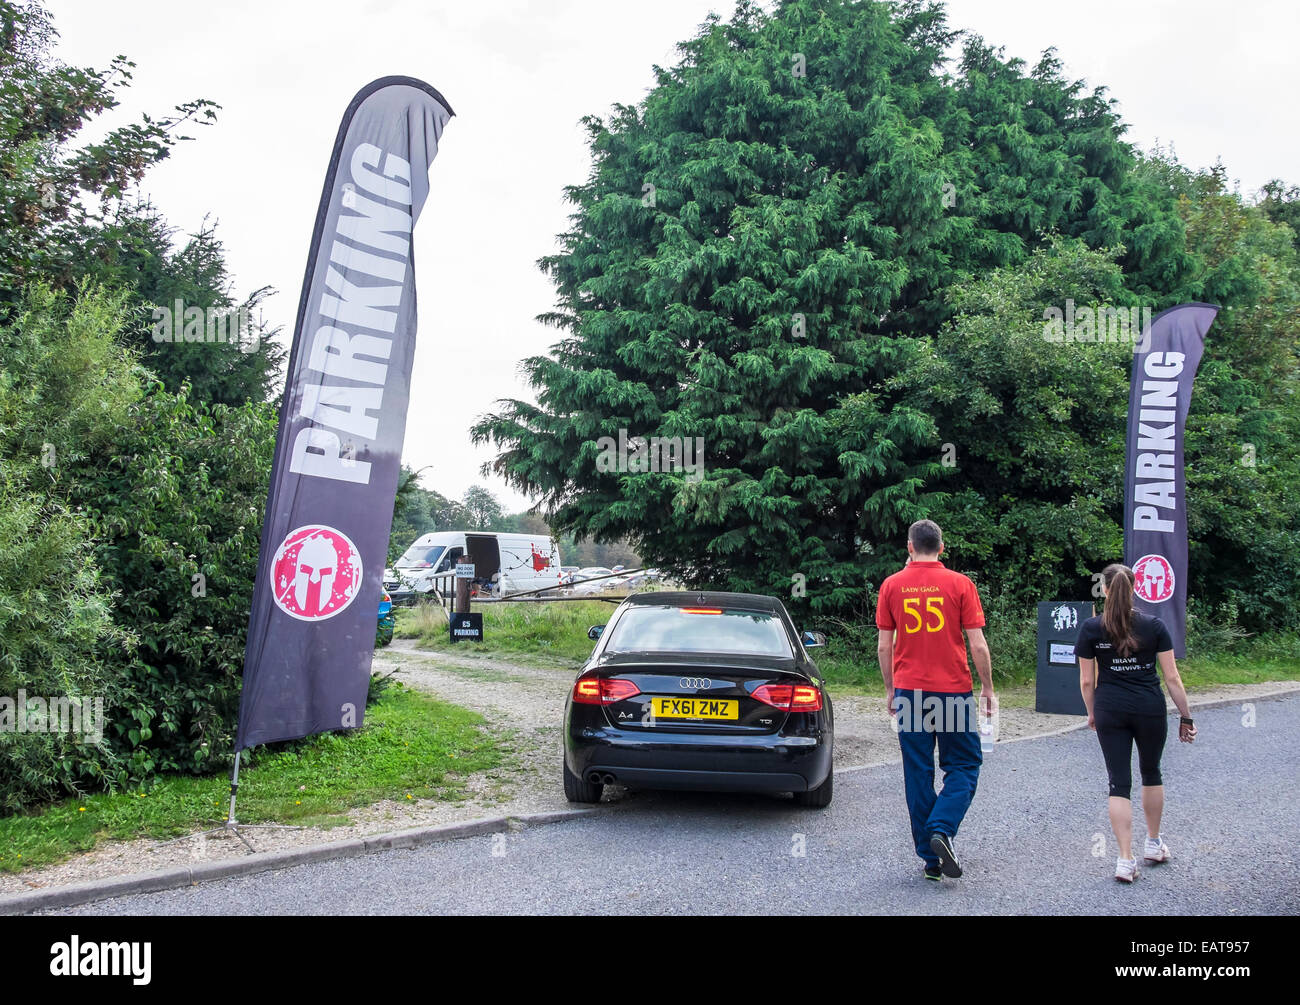 Car parking for Spartan race competitors and spectators in field on Fen Road Milton Stock Photo